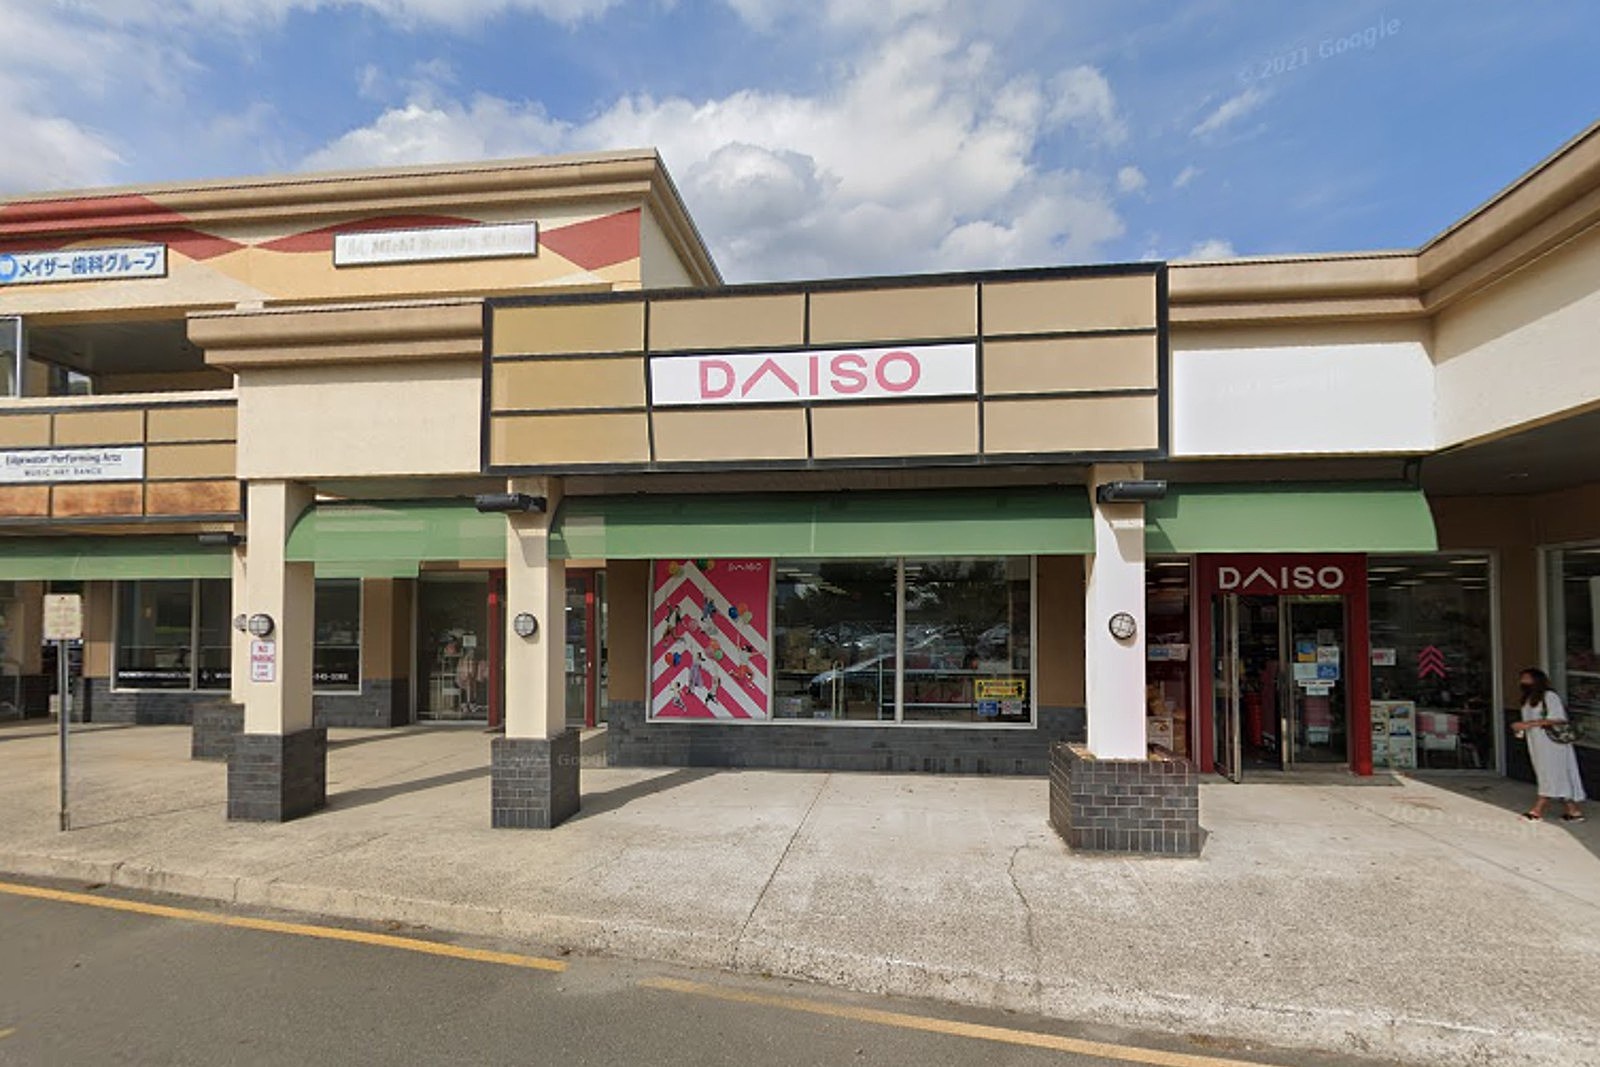 Japanese discount giant, Daiso, opens its second New Jersey store